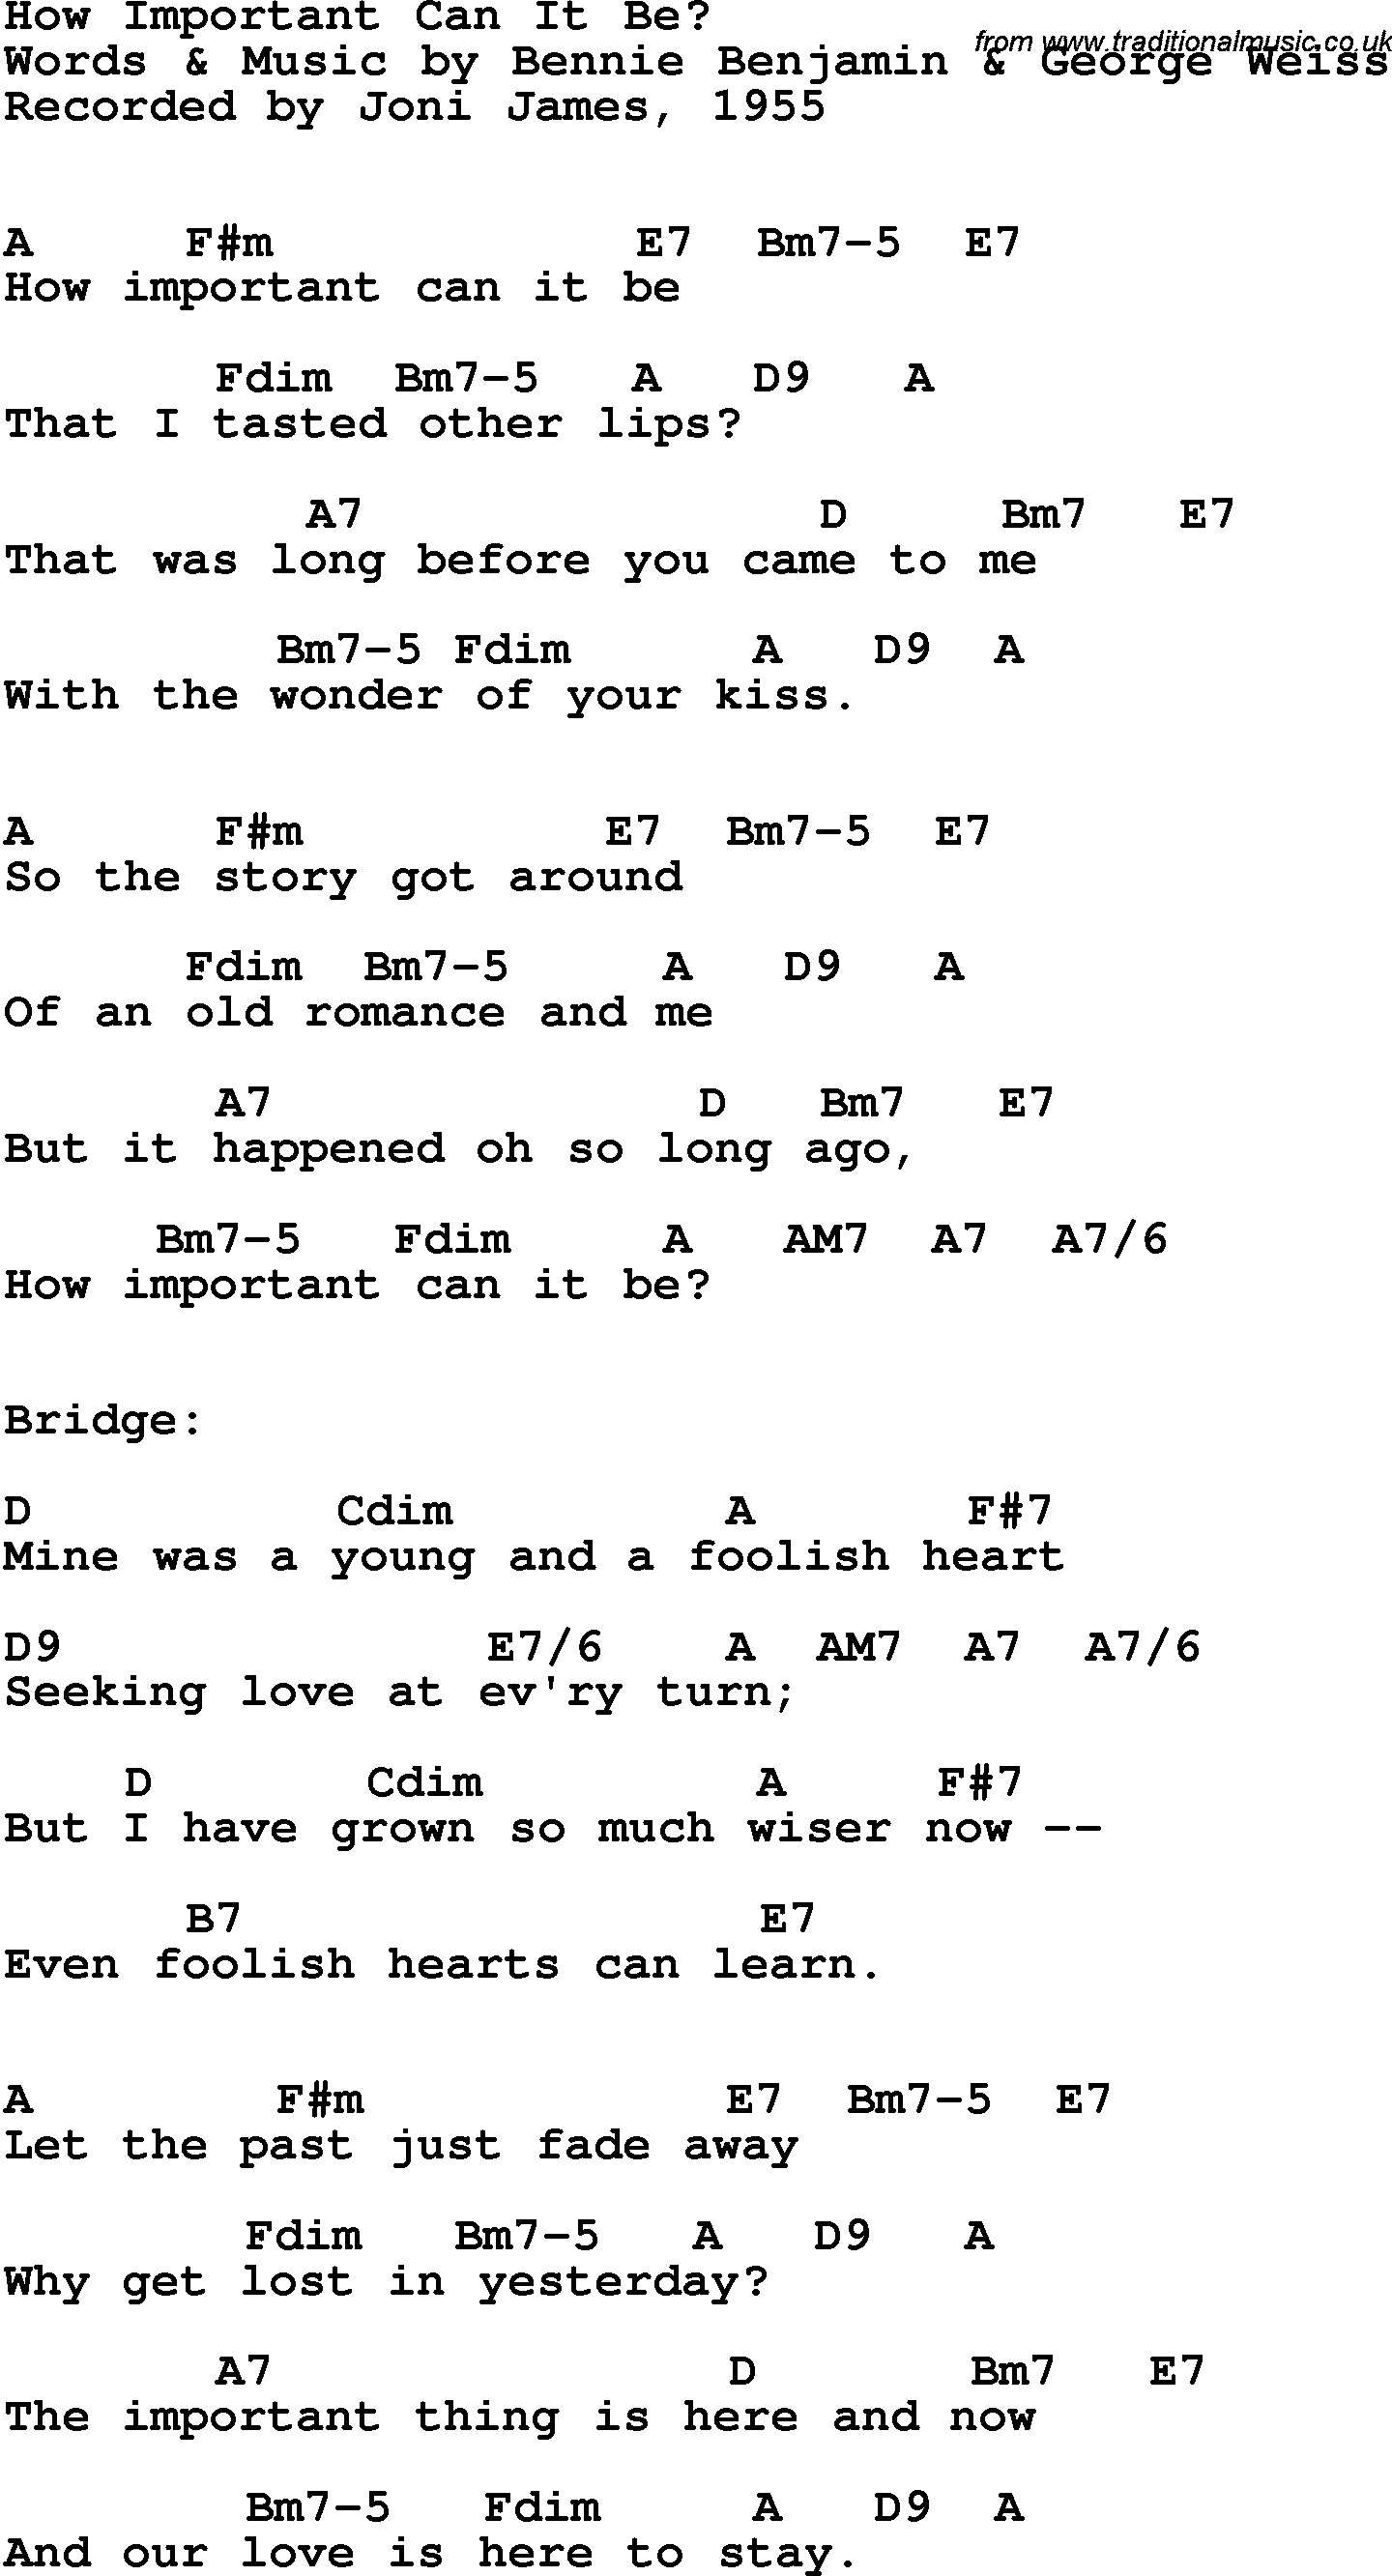 Song Lyrics with guitar chords for How Important Can It Be - Joni James, 1955